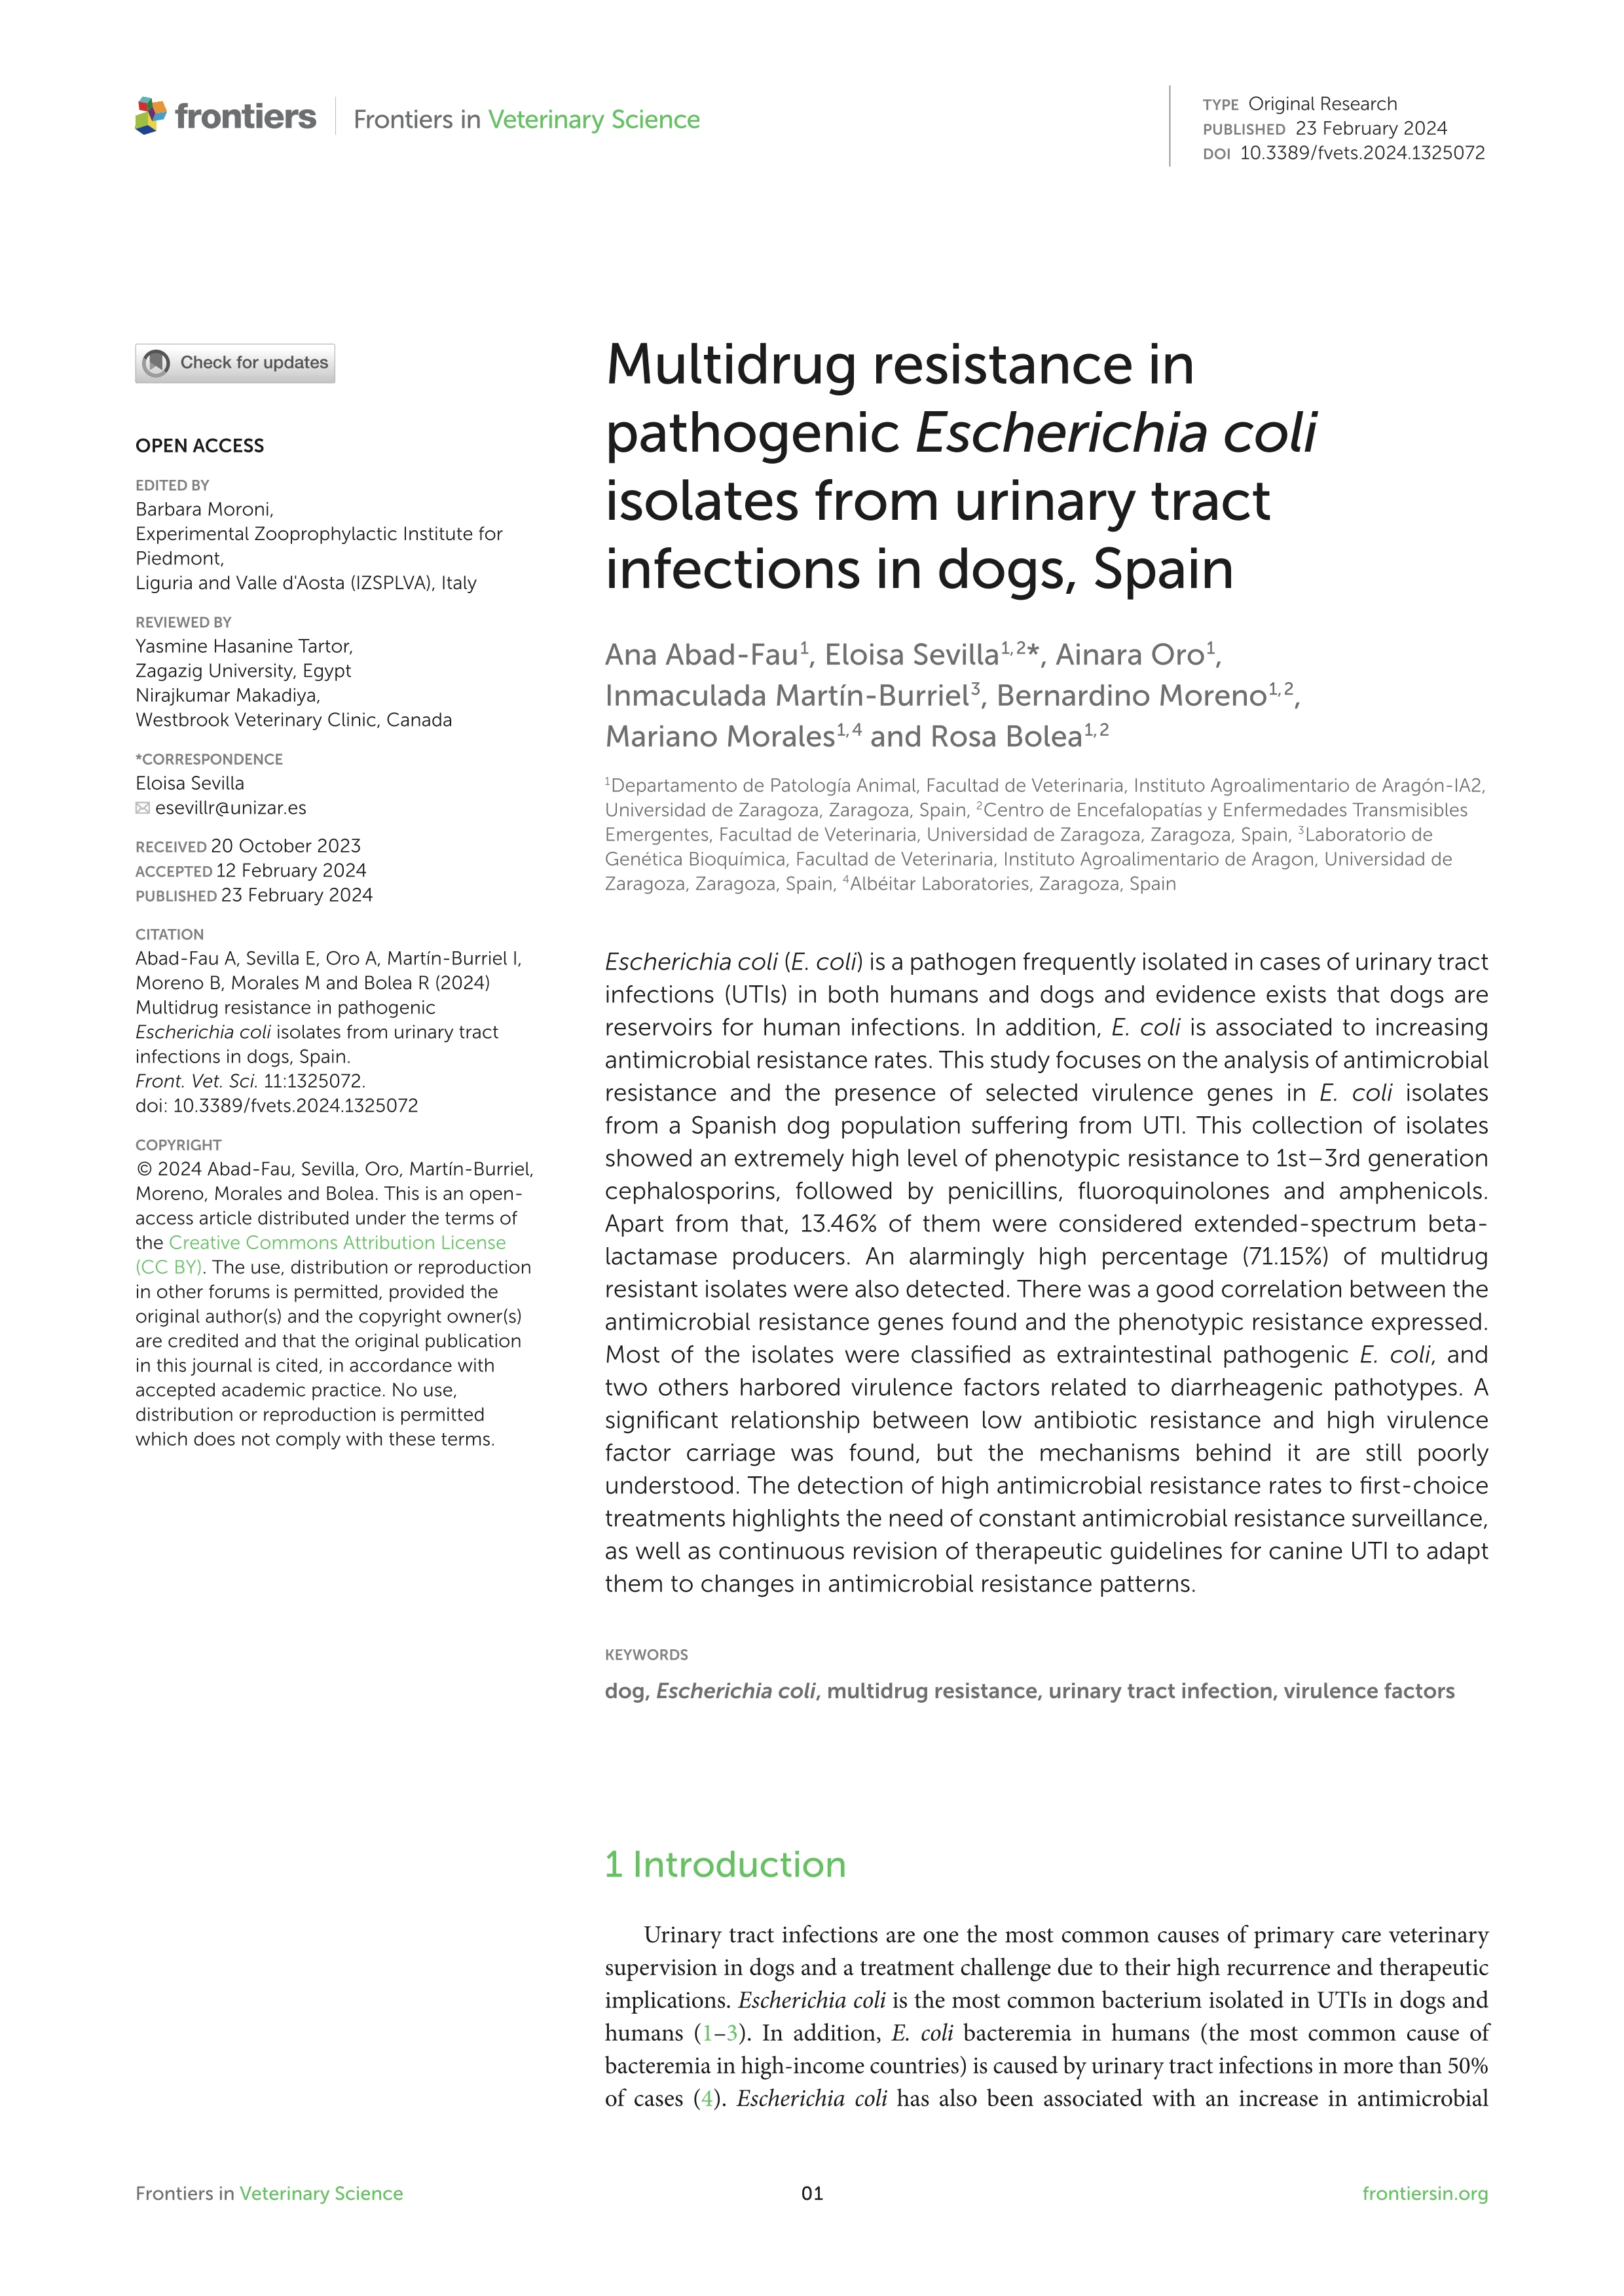 Multidrug resistance in pathogenic Escherichia coli isolates from urinary tract infections in dogs, Spain